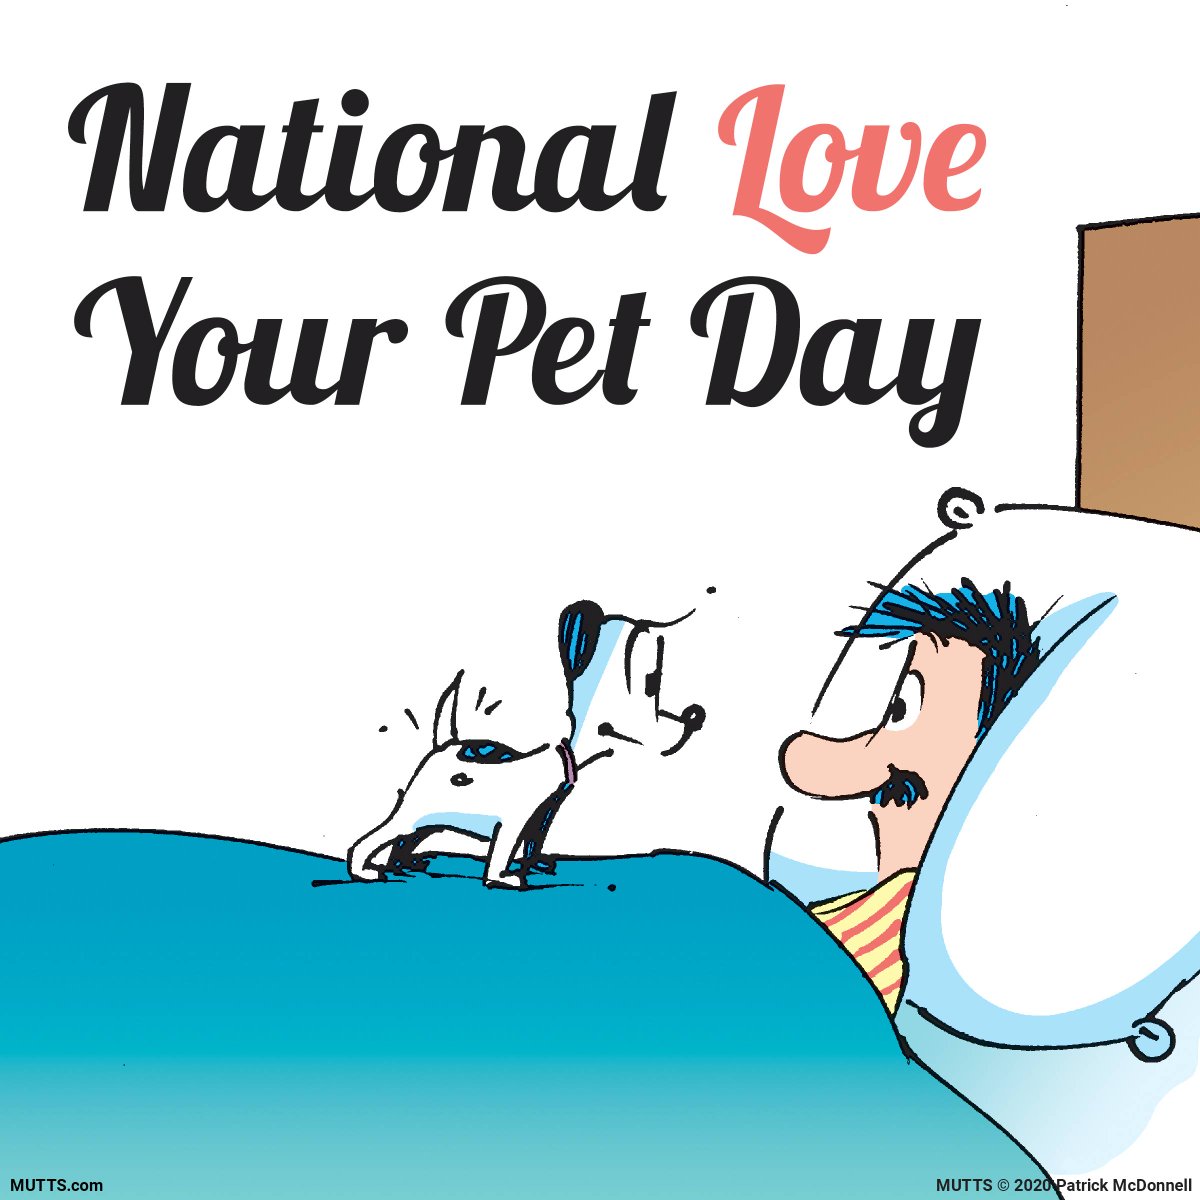 National Love Your Pet Day | #OnThisDay

#Pets can offer unconditional love & help to make a home feel more welcoming and inviting. It’s only appropriate that #petowners take the time to show appreciation for them by celebrating today. 

#vetswithpets #dog ow.ly/zuTF30sbhco